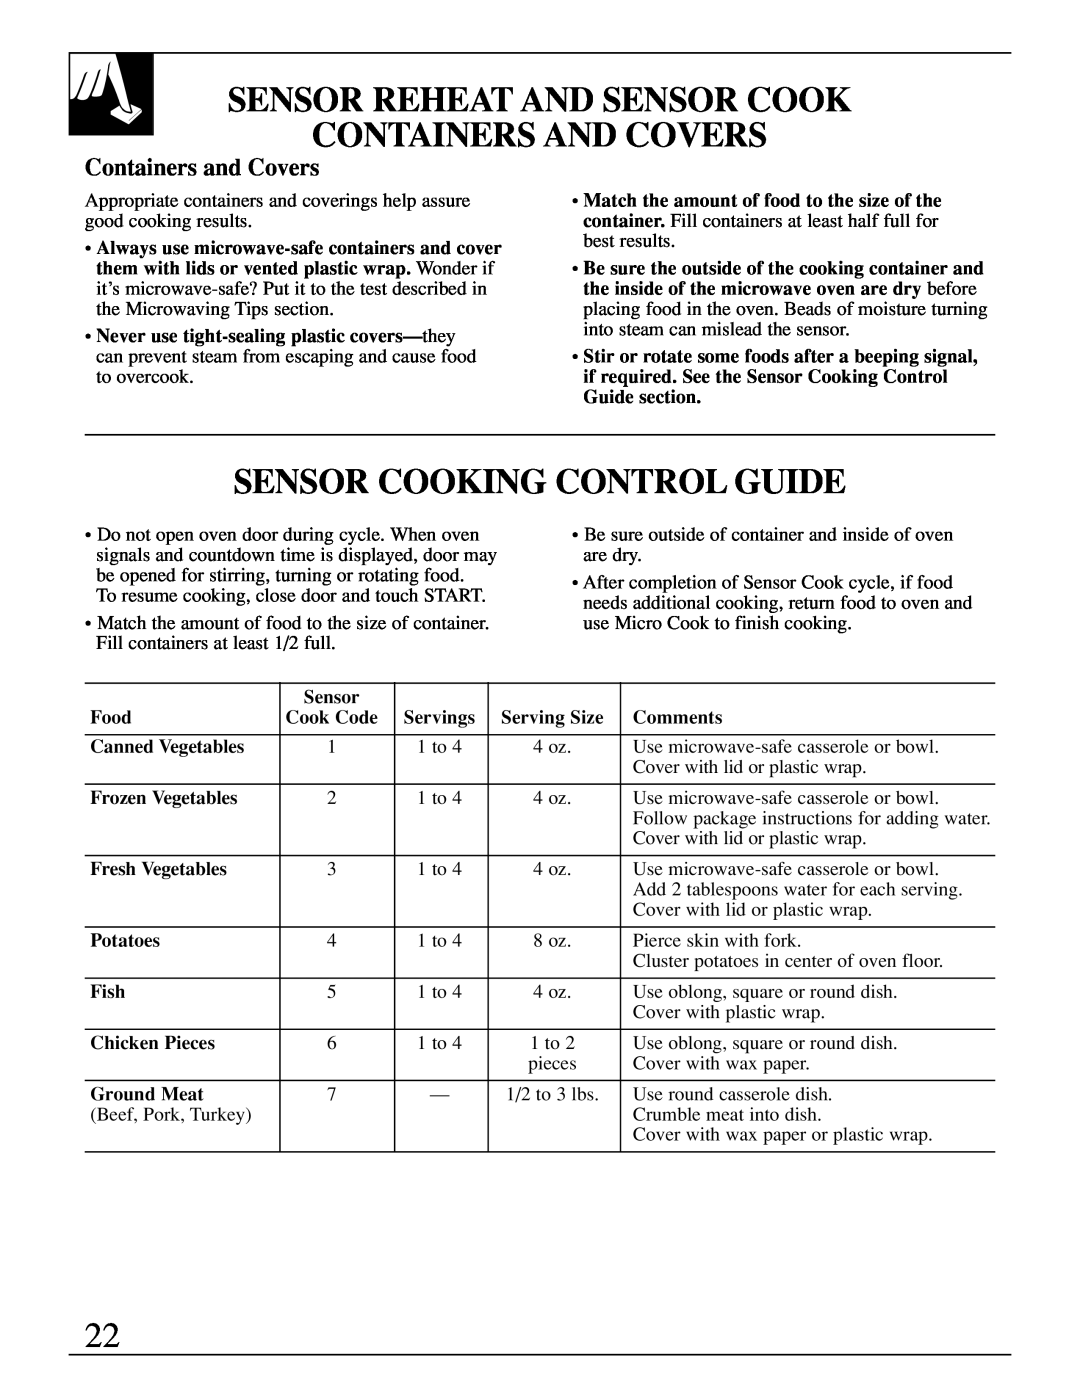 GE JEB1095 Sensor Reheat And Sensor Cook, Containers And Covers, Sensor Cooking Control Guide, Containers and Covers 